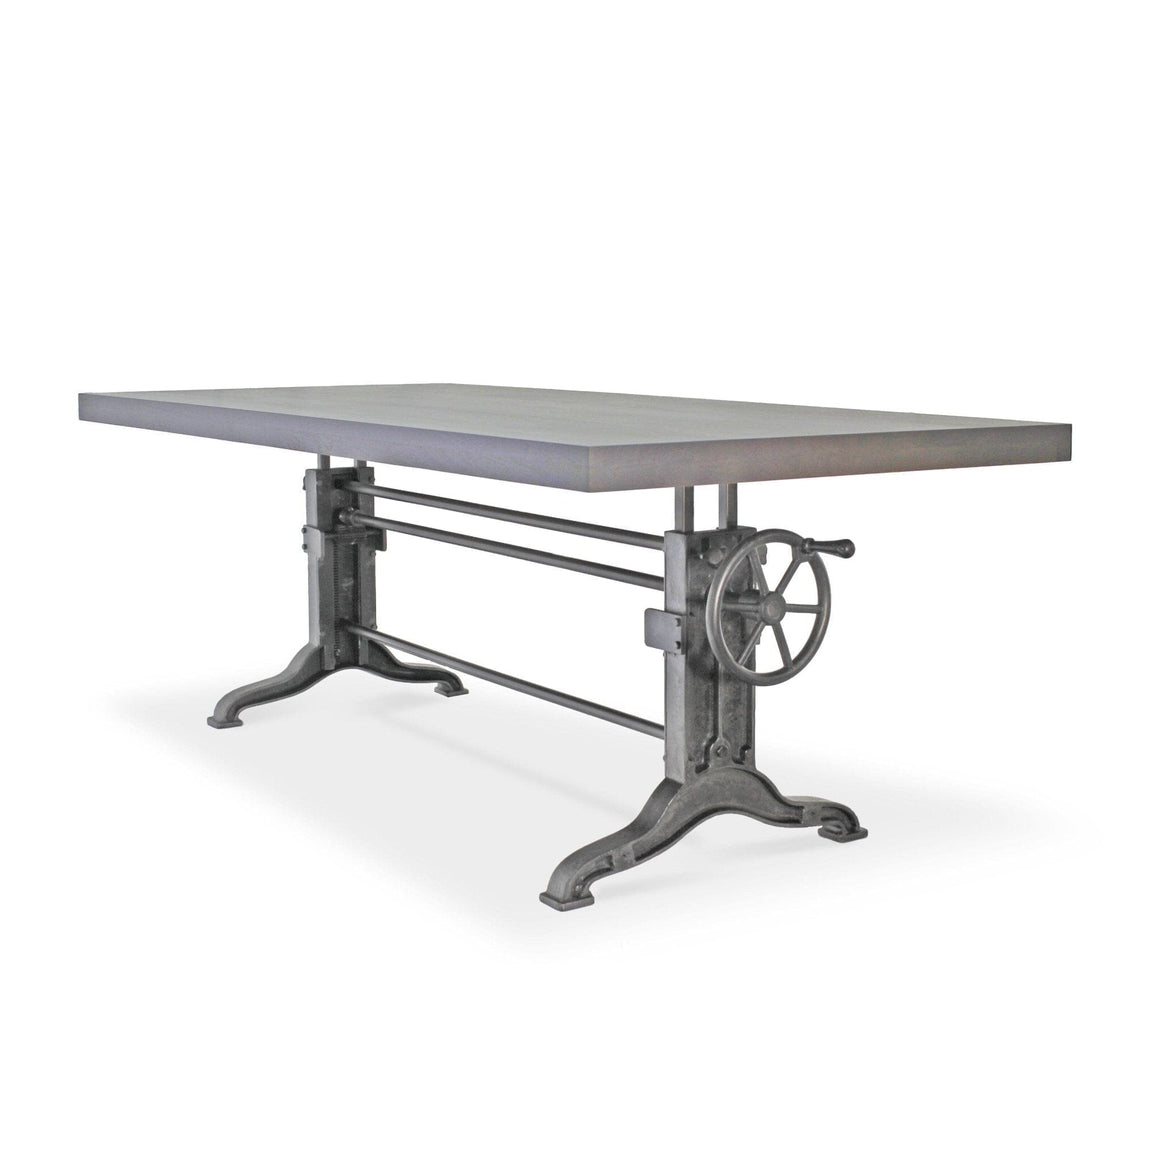 Frederick Adjustable Height Dining Table Desk - Cast Iron - Gray Top - Rustic Deco Incorporated